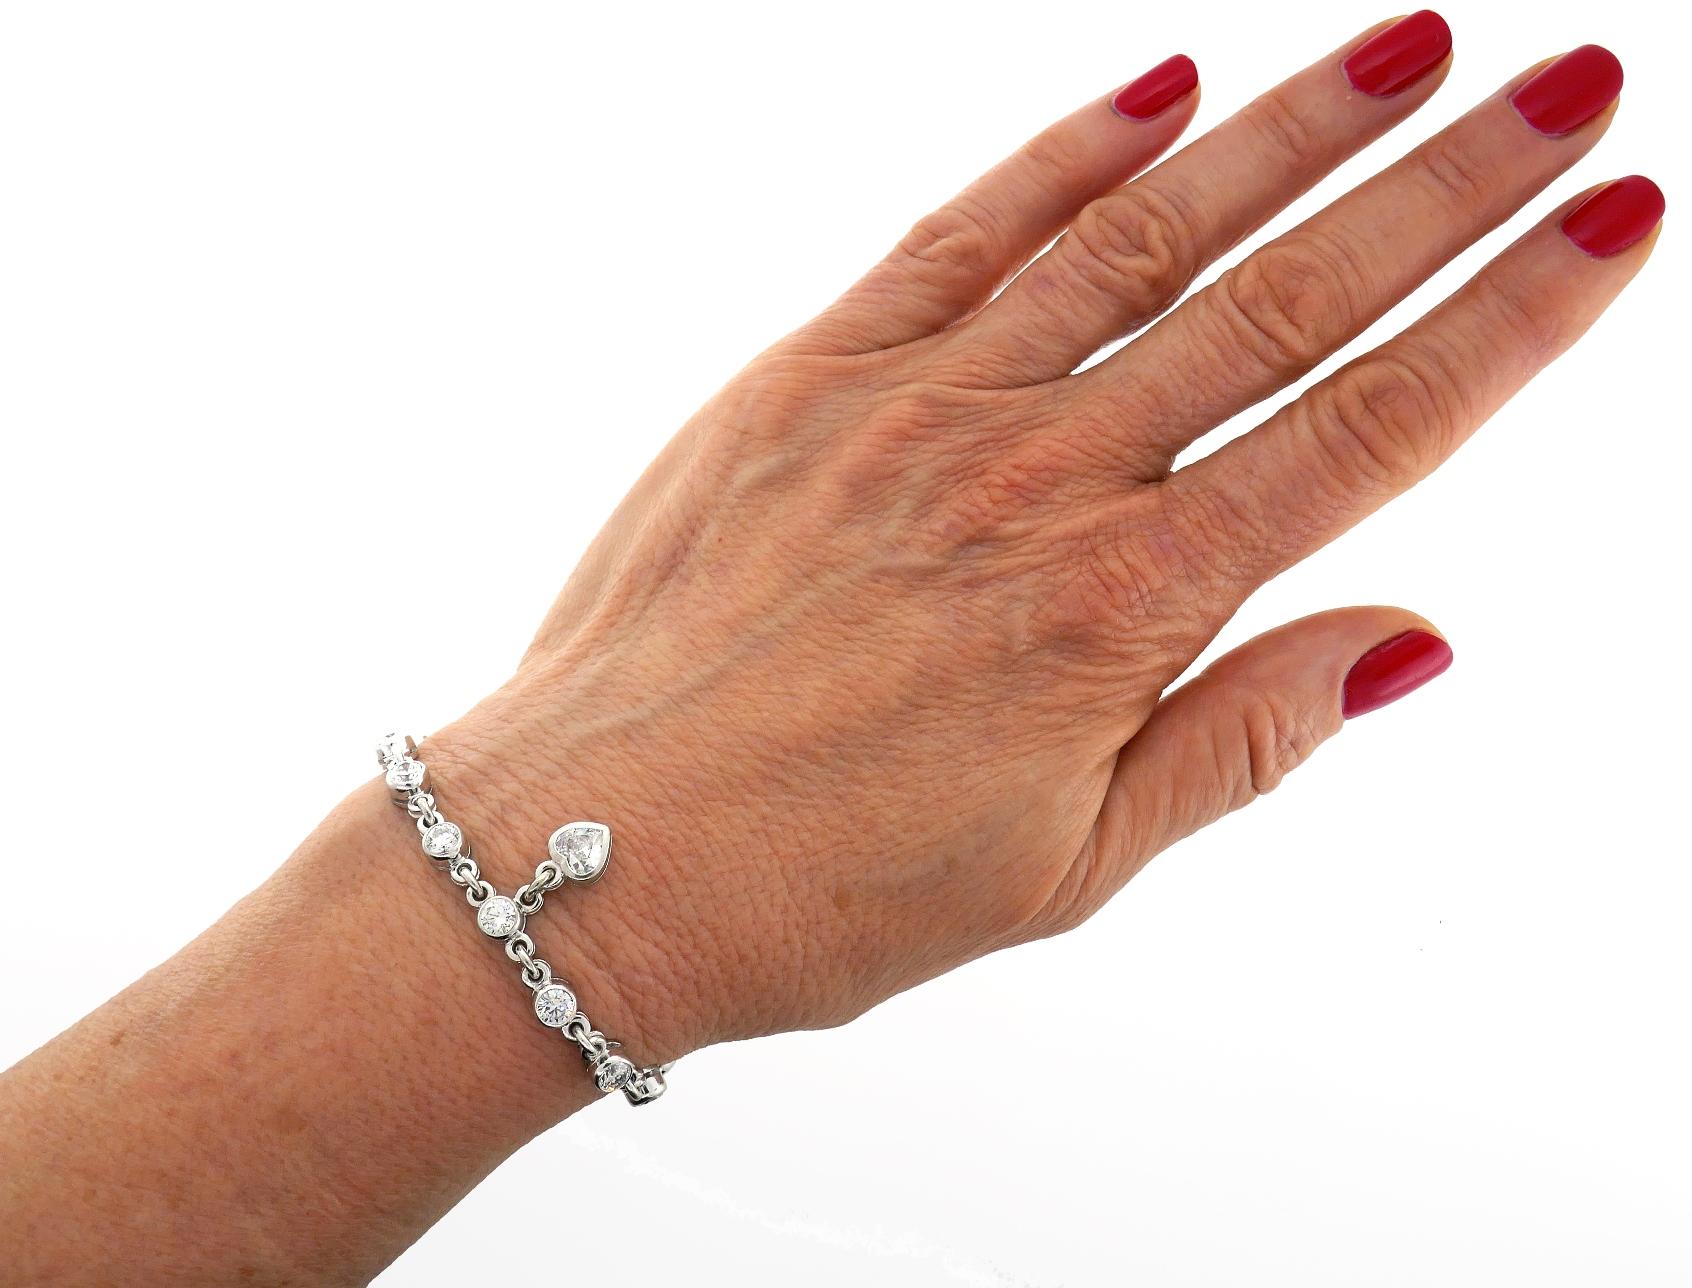 Stunning diamond and 18 karat white gold tennis bracelet created by Laurence Graff. The bracelet features fourteen perfectly matching round brilliant cut (approximately 0.25-carat each) and one heart brilliant cut (approximately 0.75-carat)